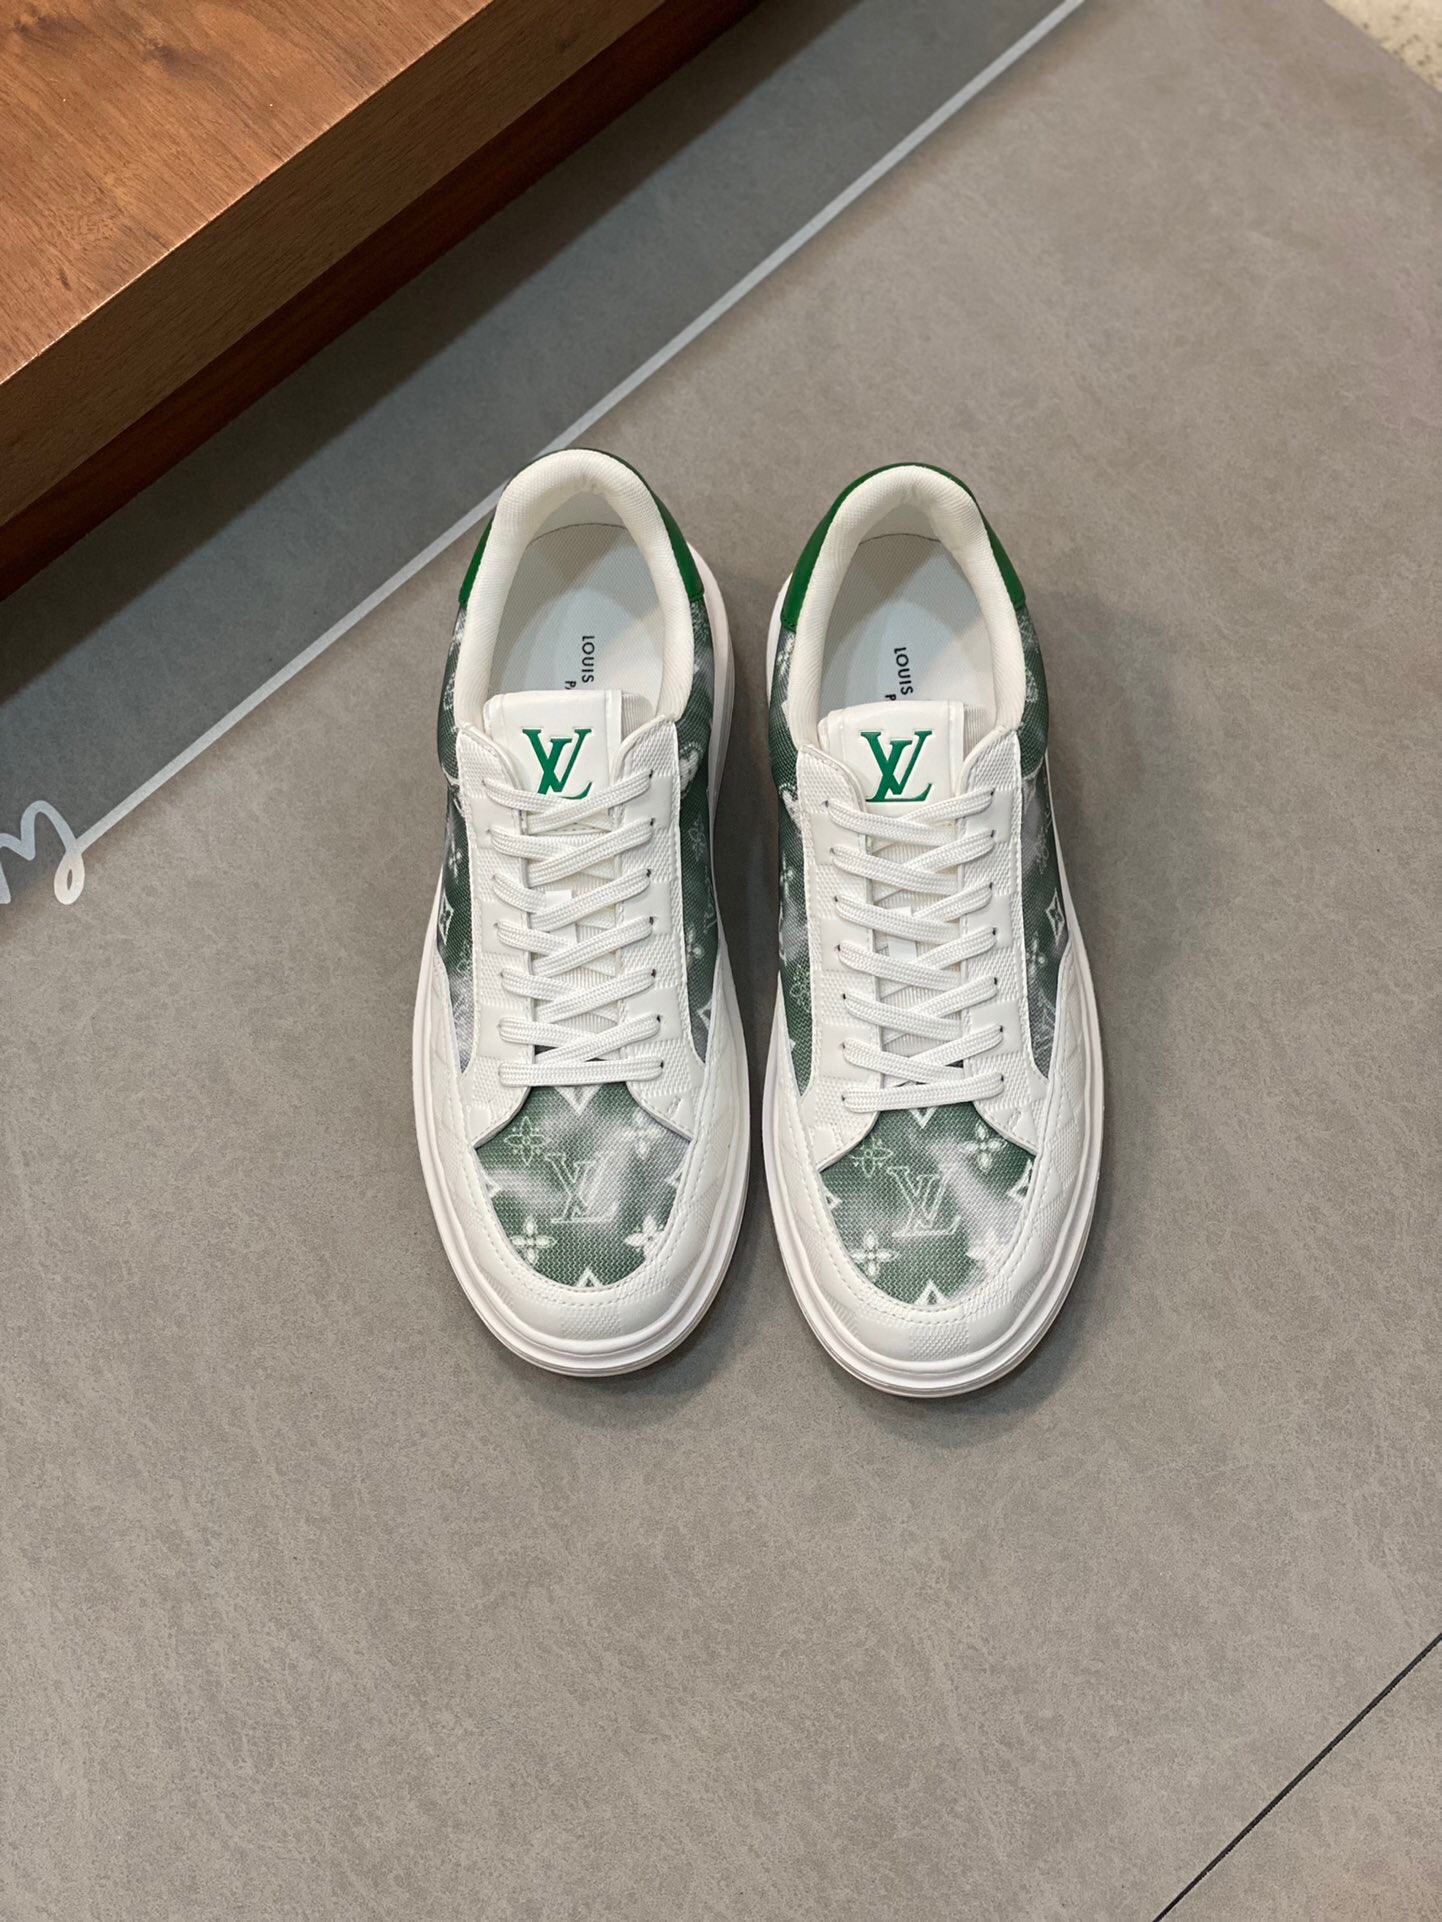 Coco Sneakers Louis Vuitton Sneakers | COCO Sneakers